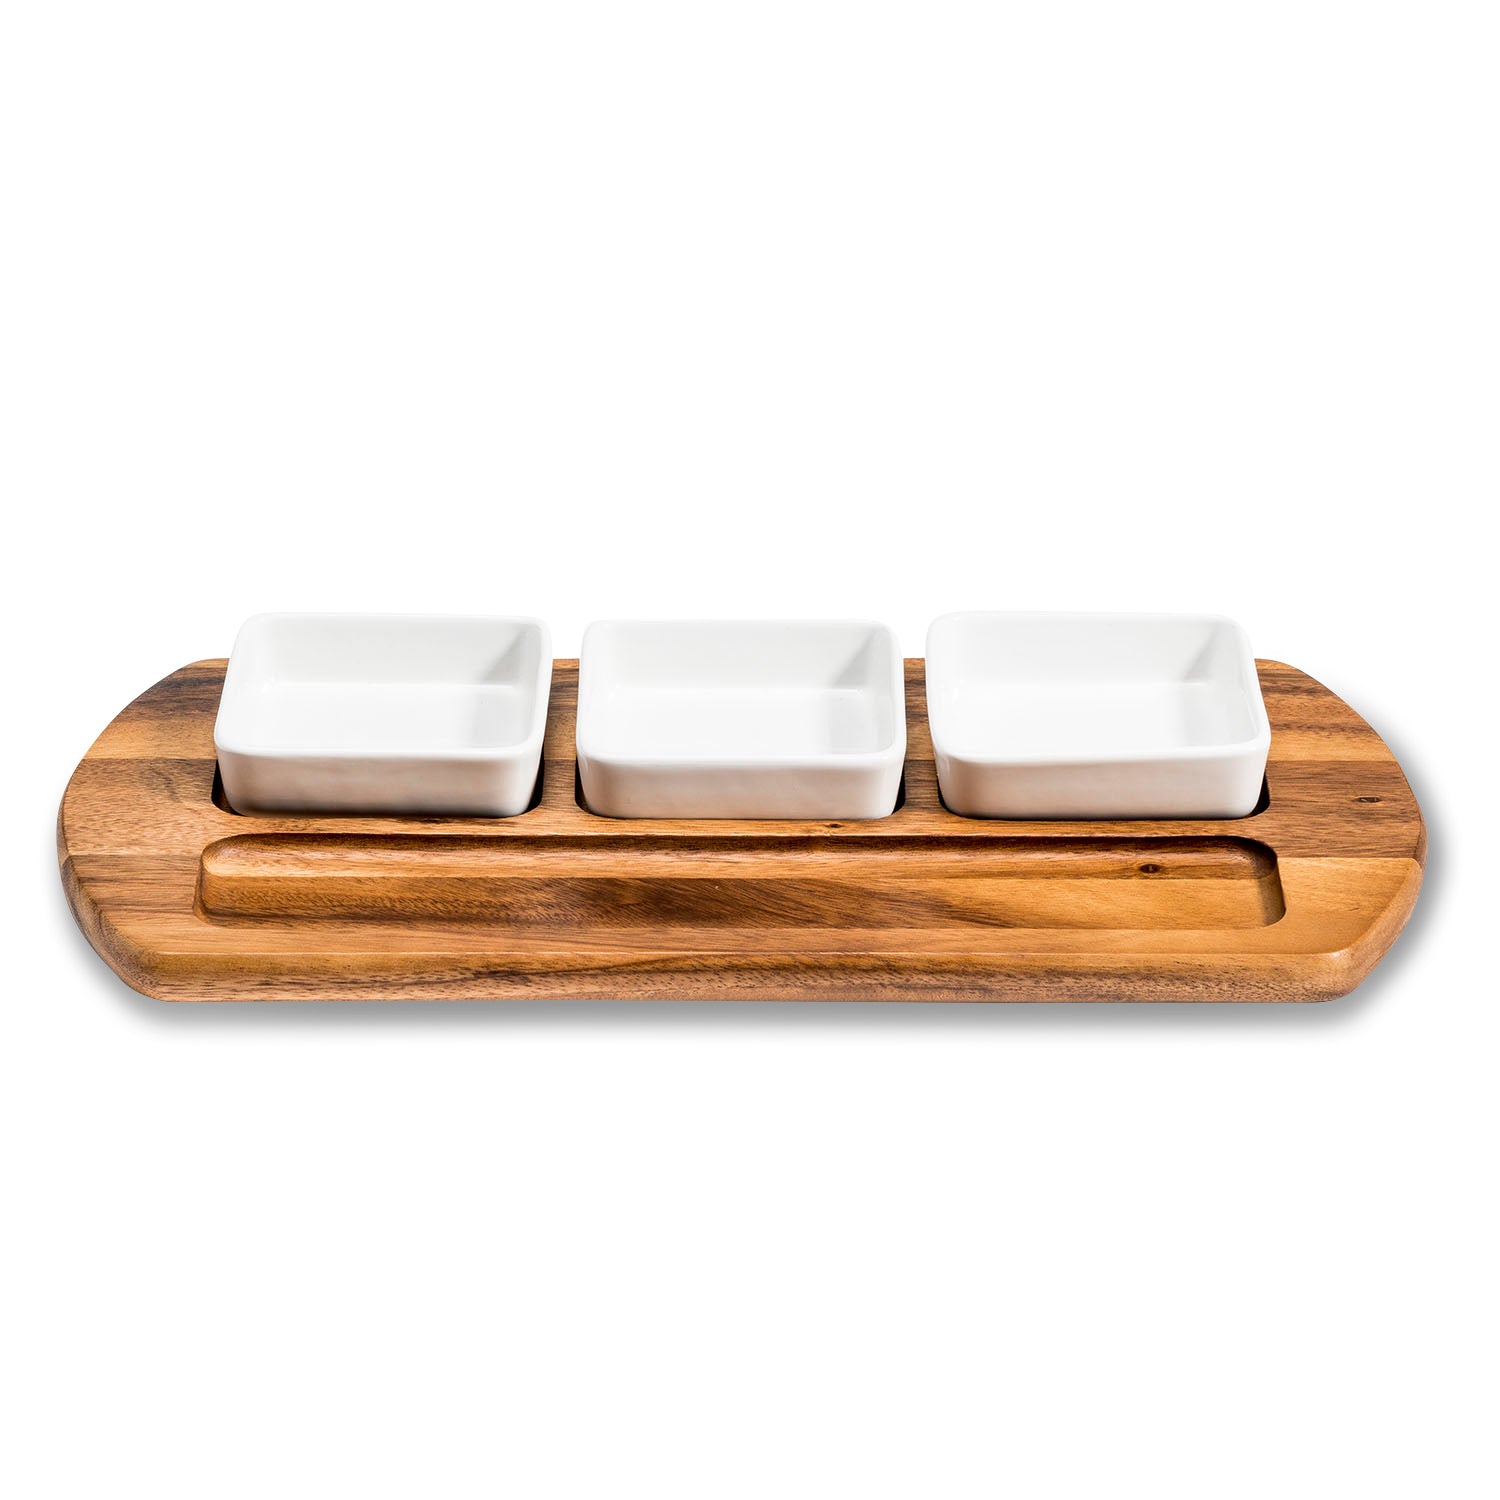 Charcuterie Serving Tray with ceramic bowls Azure Lily